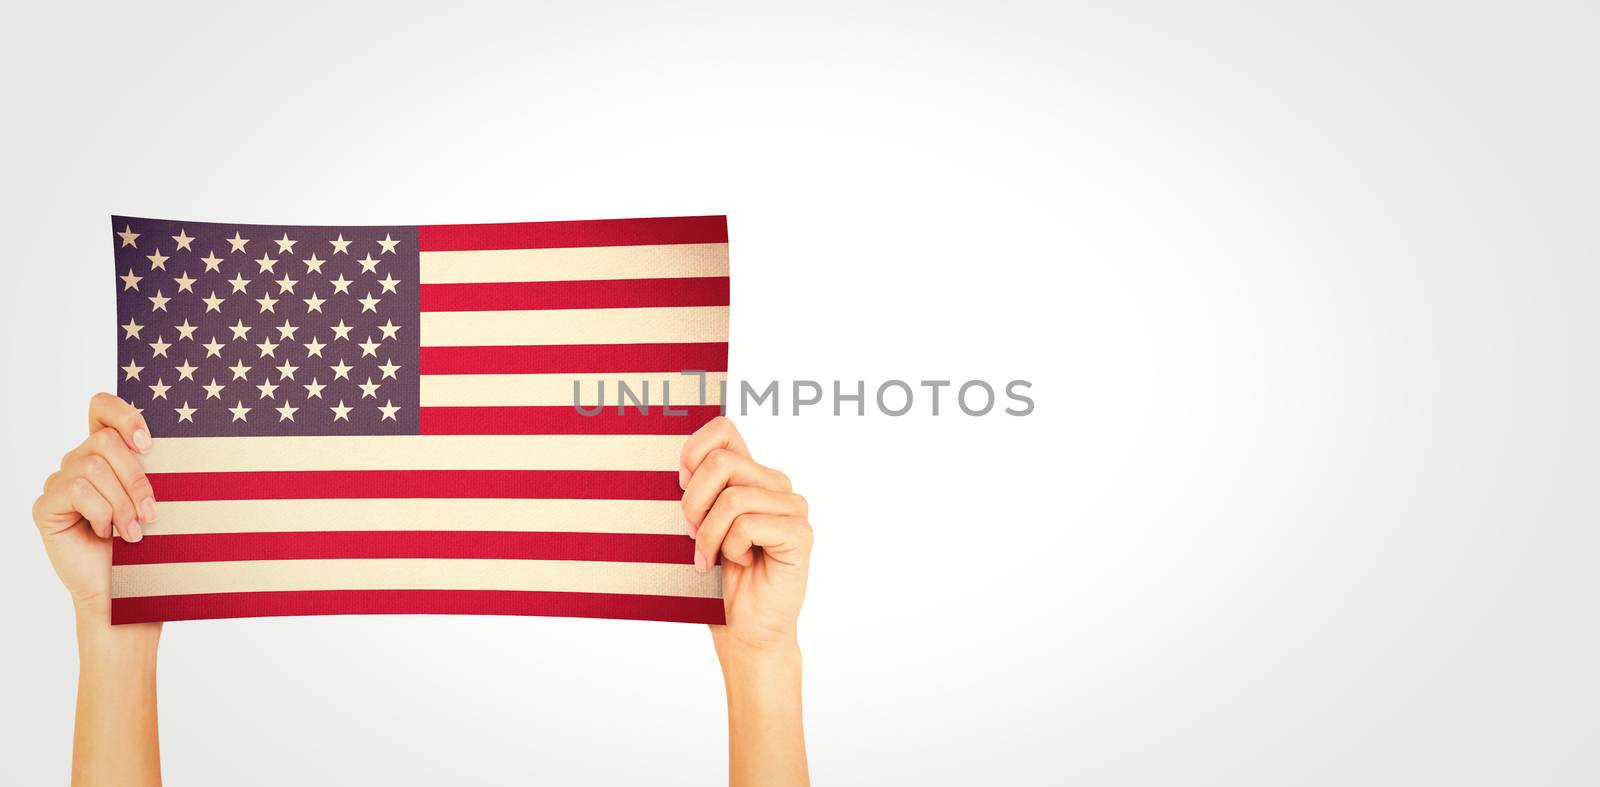 Hand showing card against usa national flag